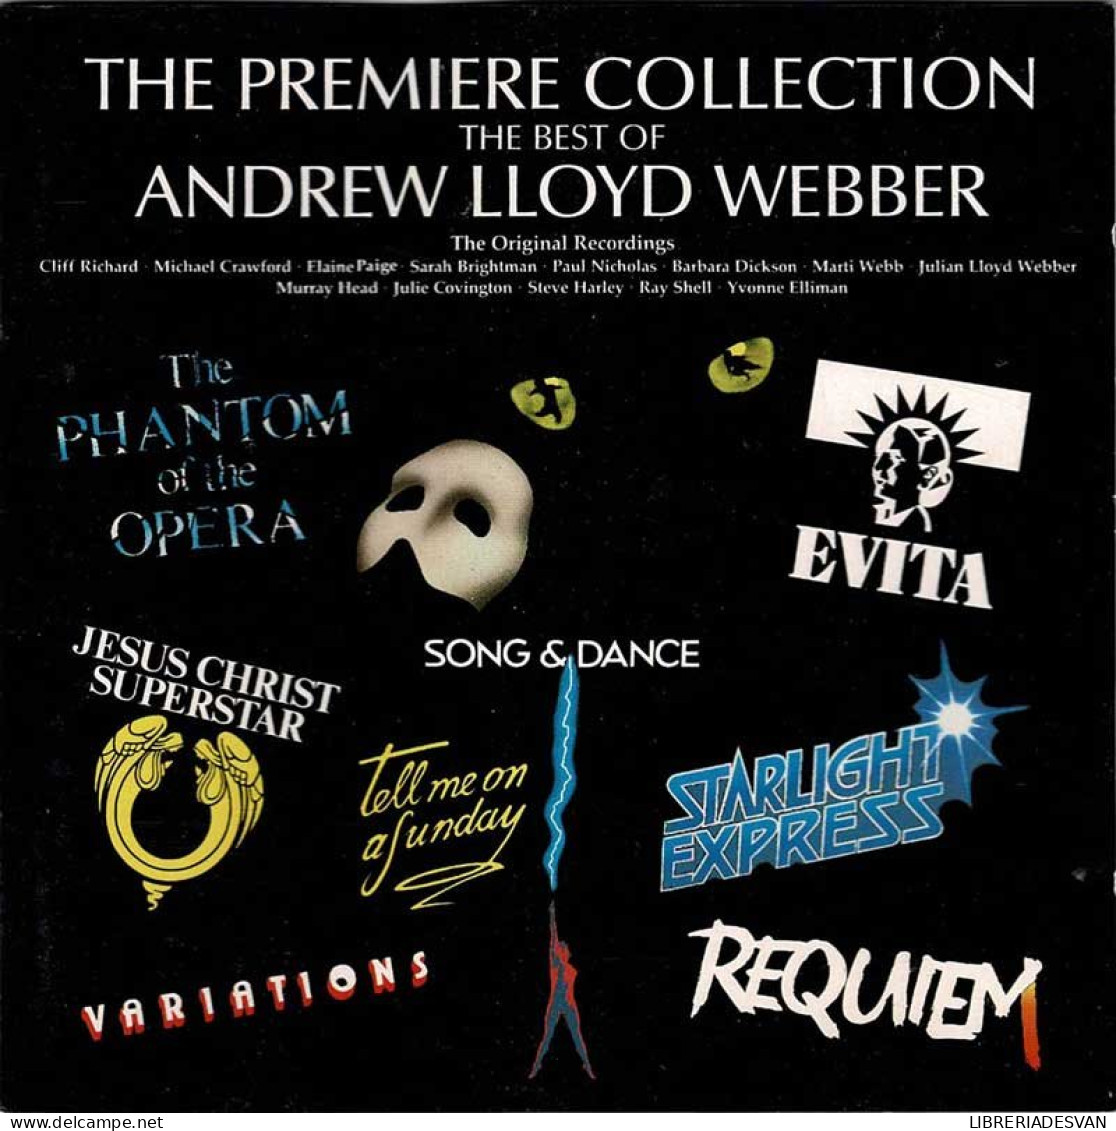 Andrew Lloyd Webber - The Premiere Collection - The Best Of Andrew Lloyd Webber. CD - Musique De Films